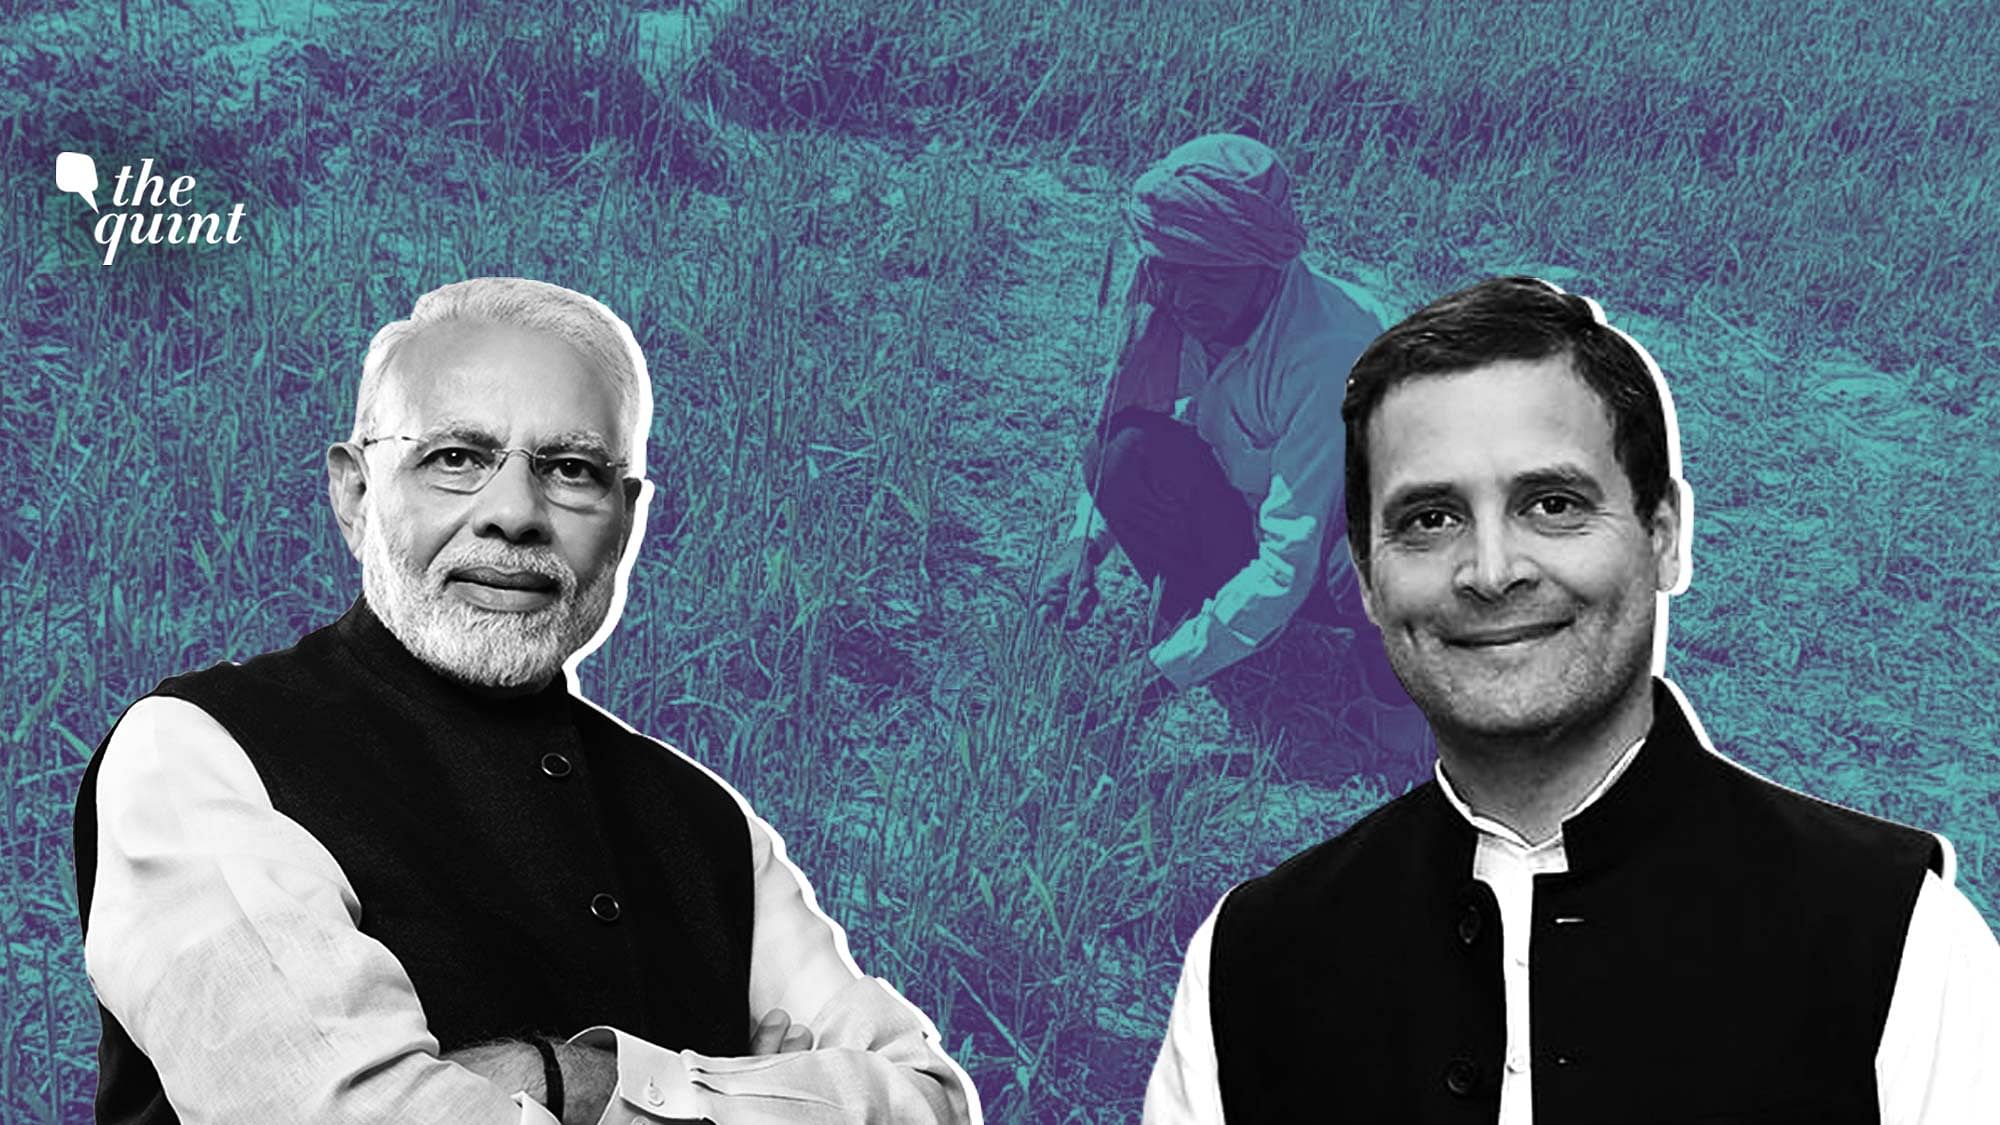 Image of PM Modi (L), Rahul Gandhi (R) against a background showing a farmer, used for representational purposes.